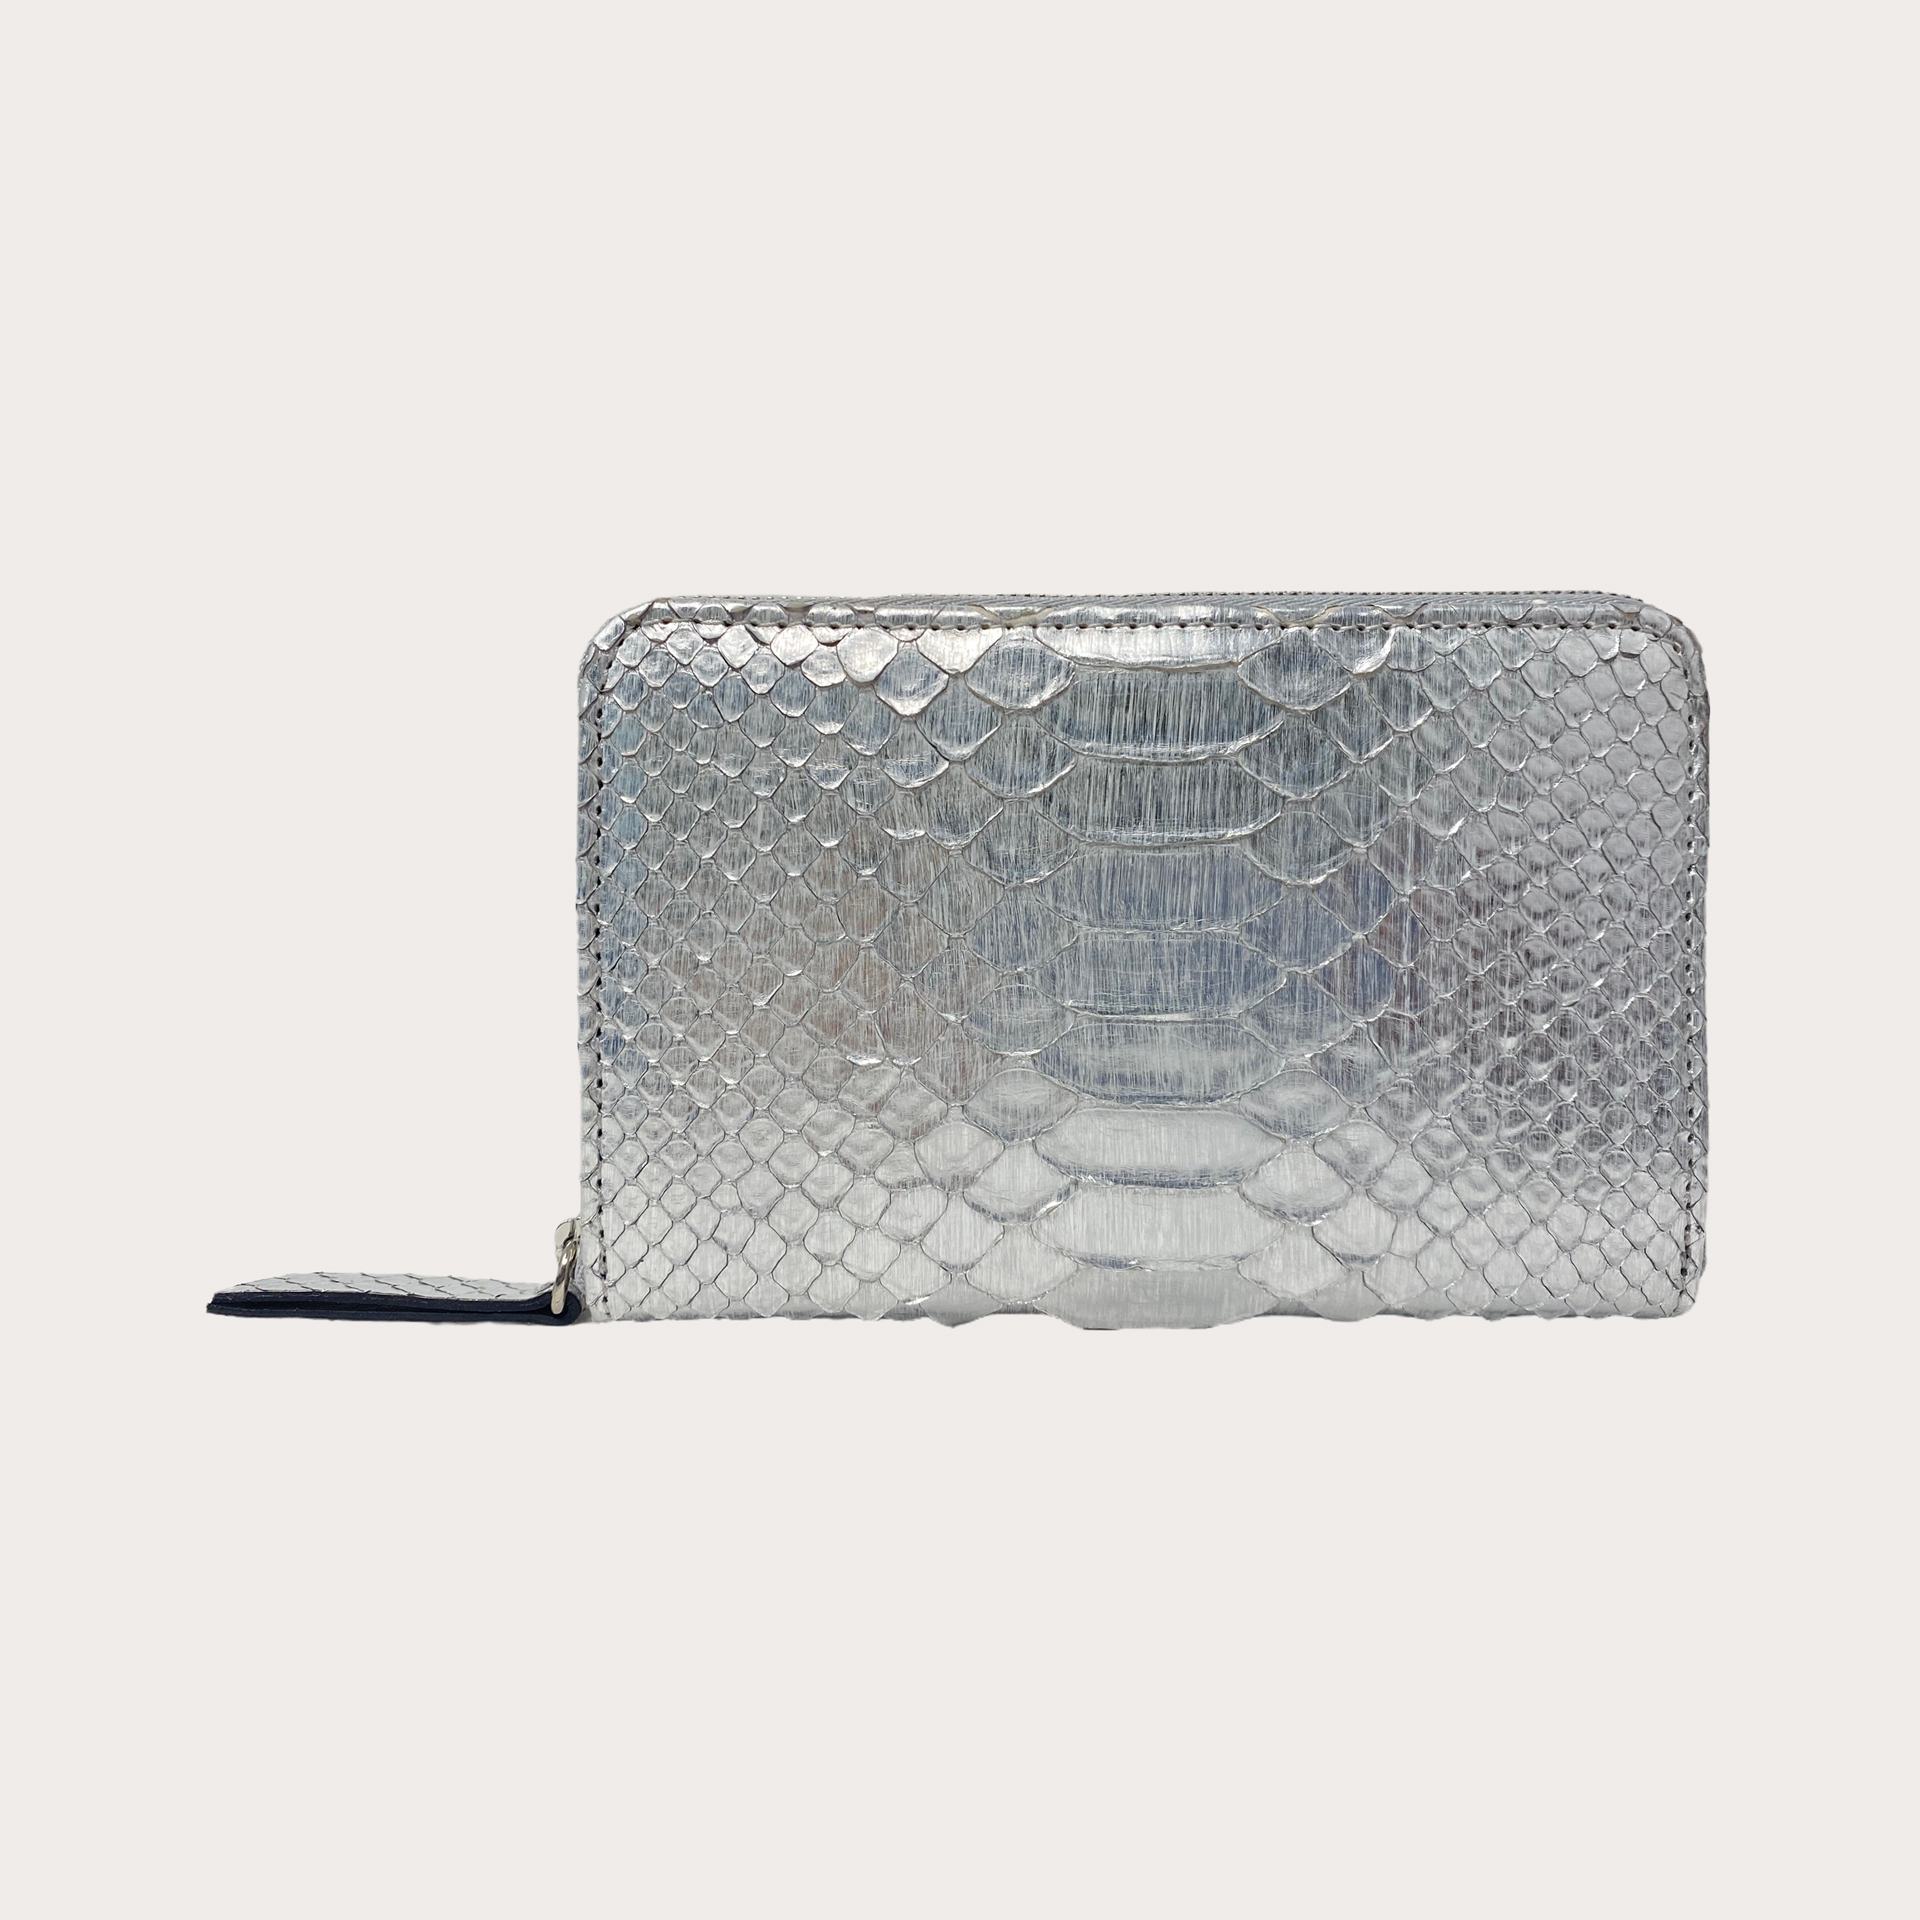 BRUCLE Women's compact wallet in python, hand-painted silver